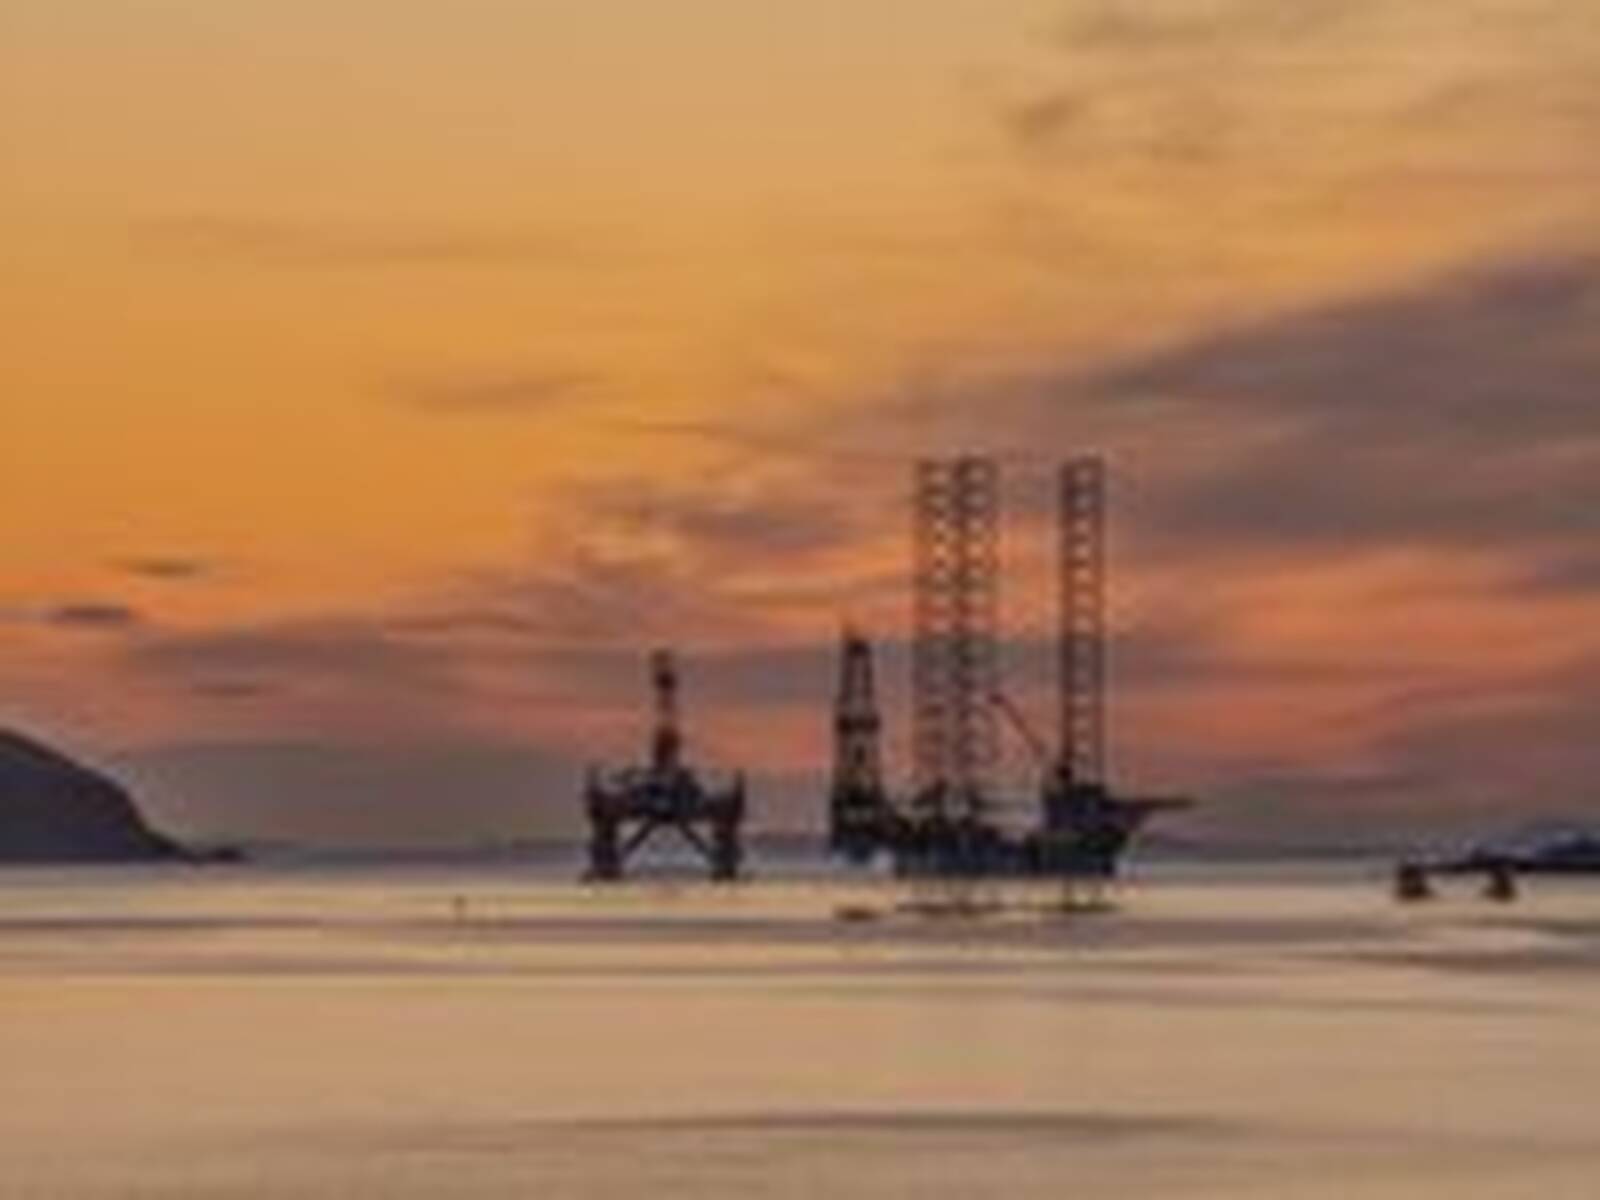 Image of Oil Rig Graveyard - Cromarty Firth by michael bennett